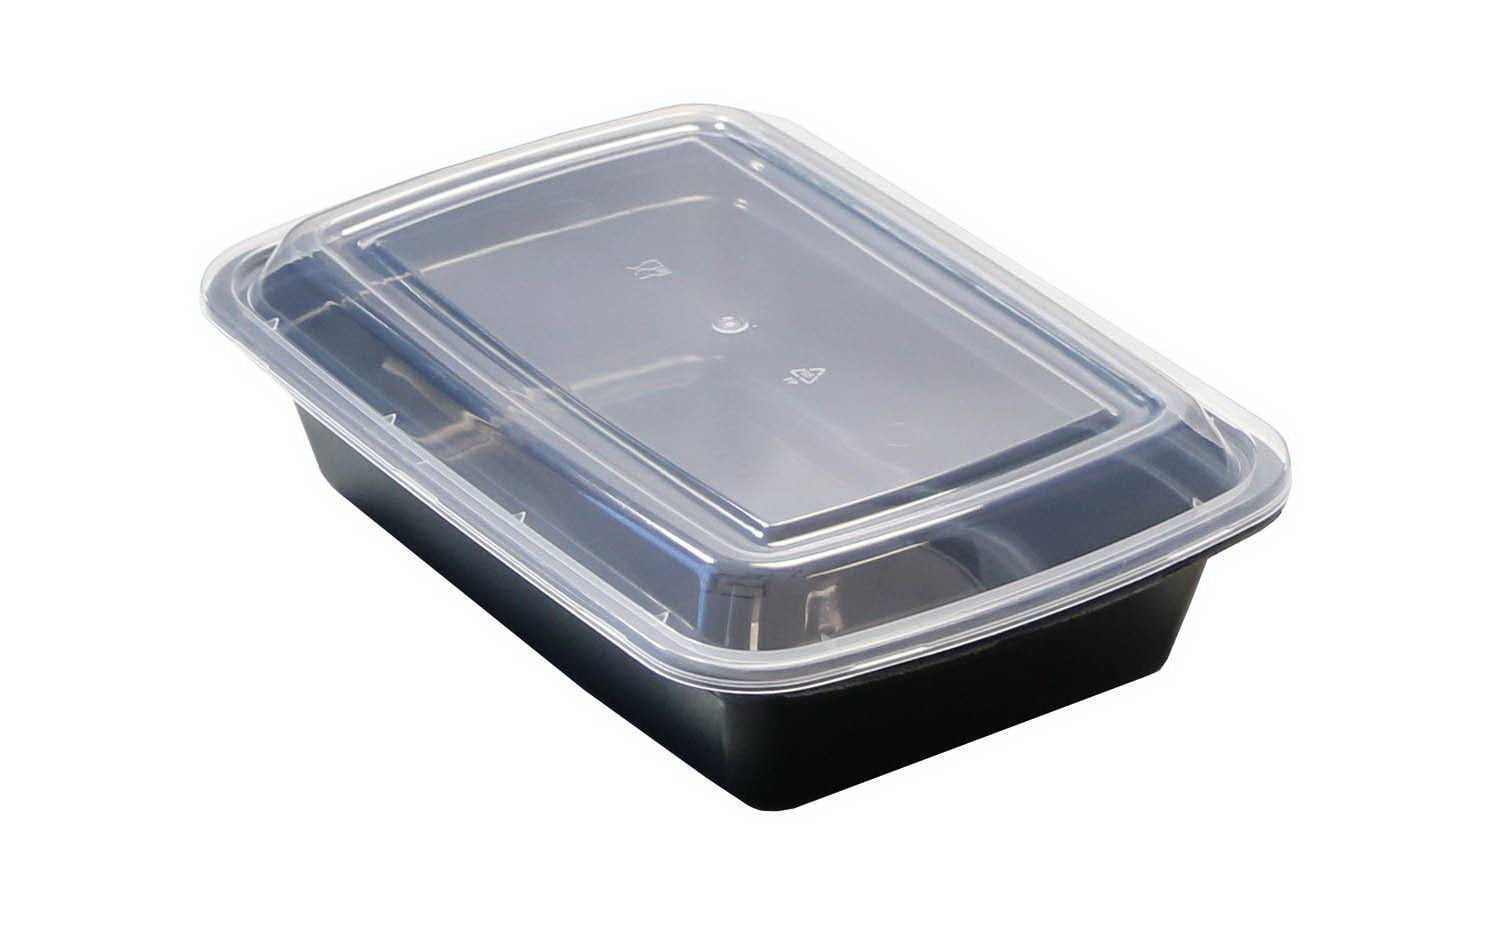 Cafe Express 38oz Meal Prep Containers 25 Count